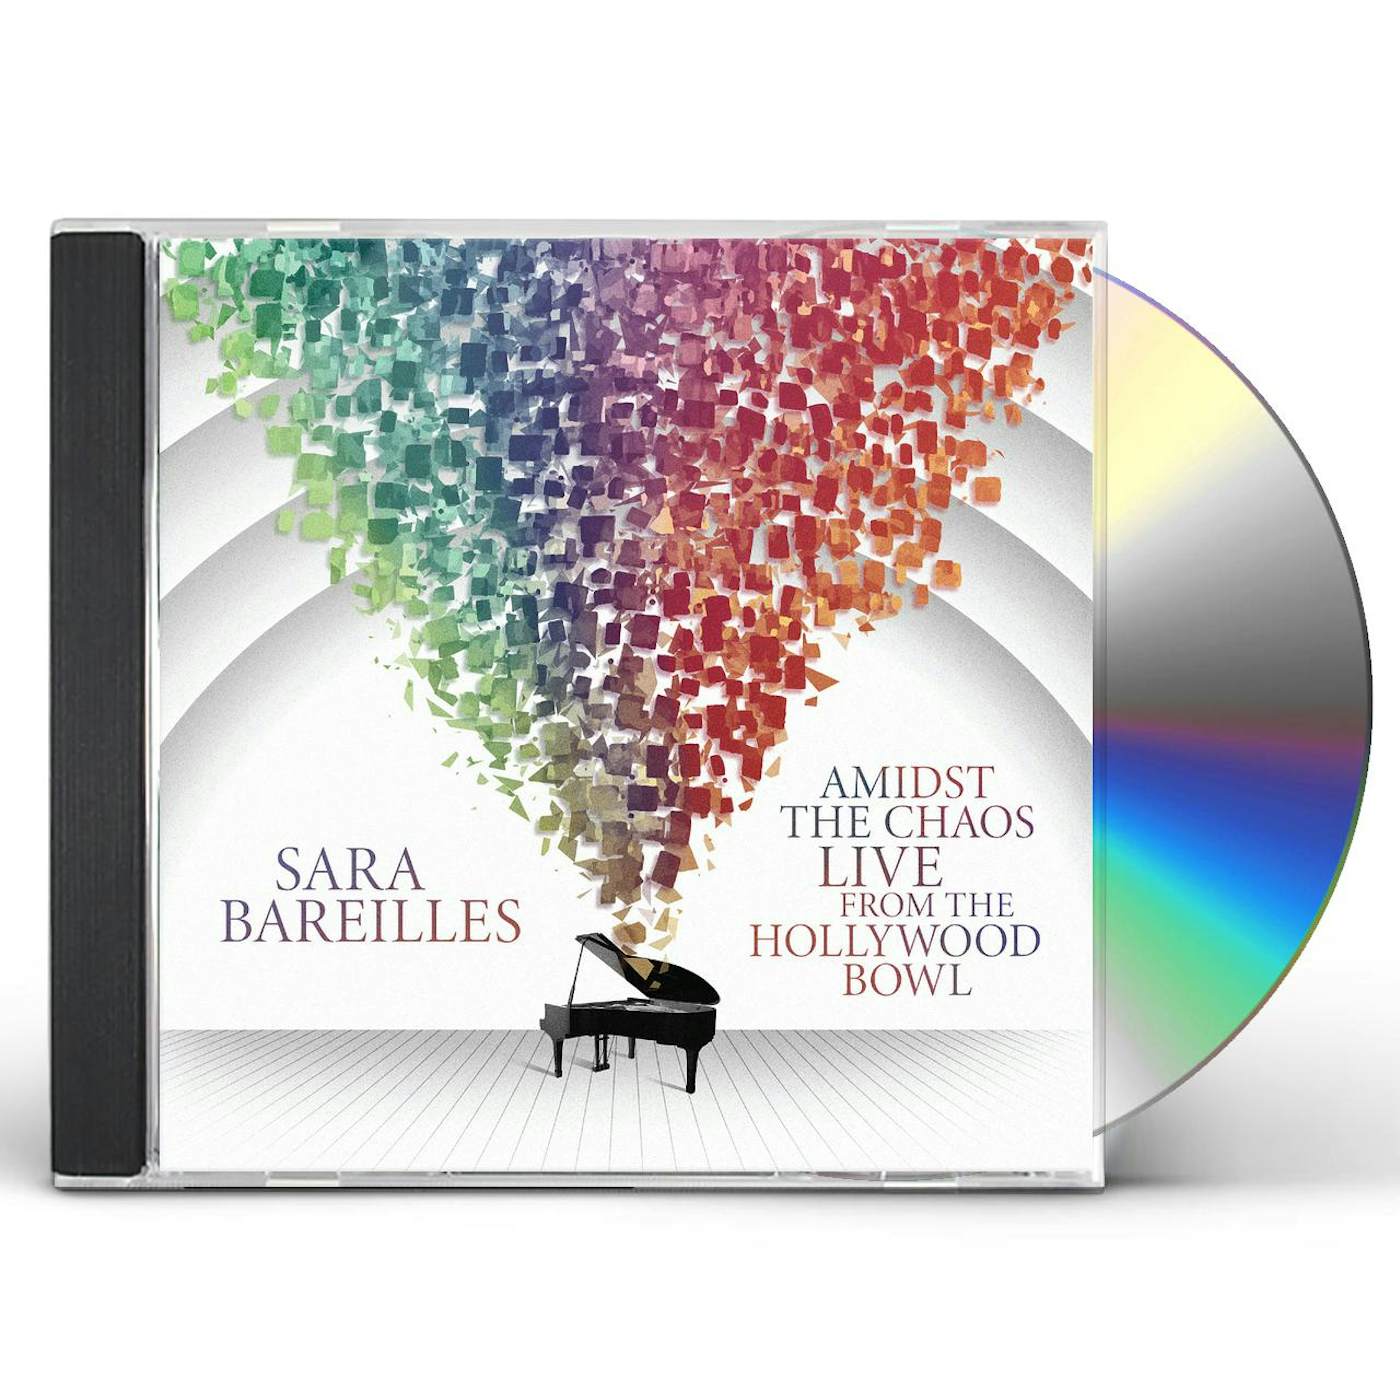 Sara Bareilles AMIDST THE CHAOS: LIVE FROM THE HOLLYWOOD BOWL CD